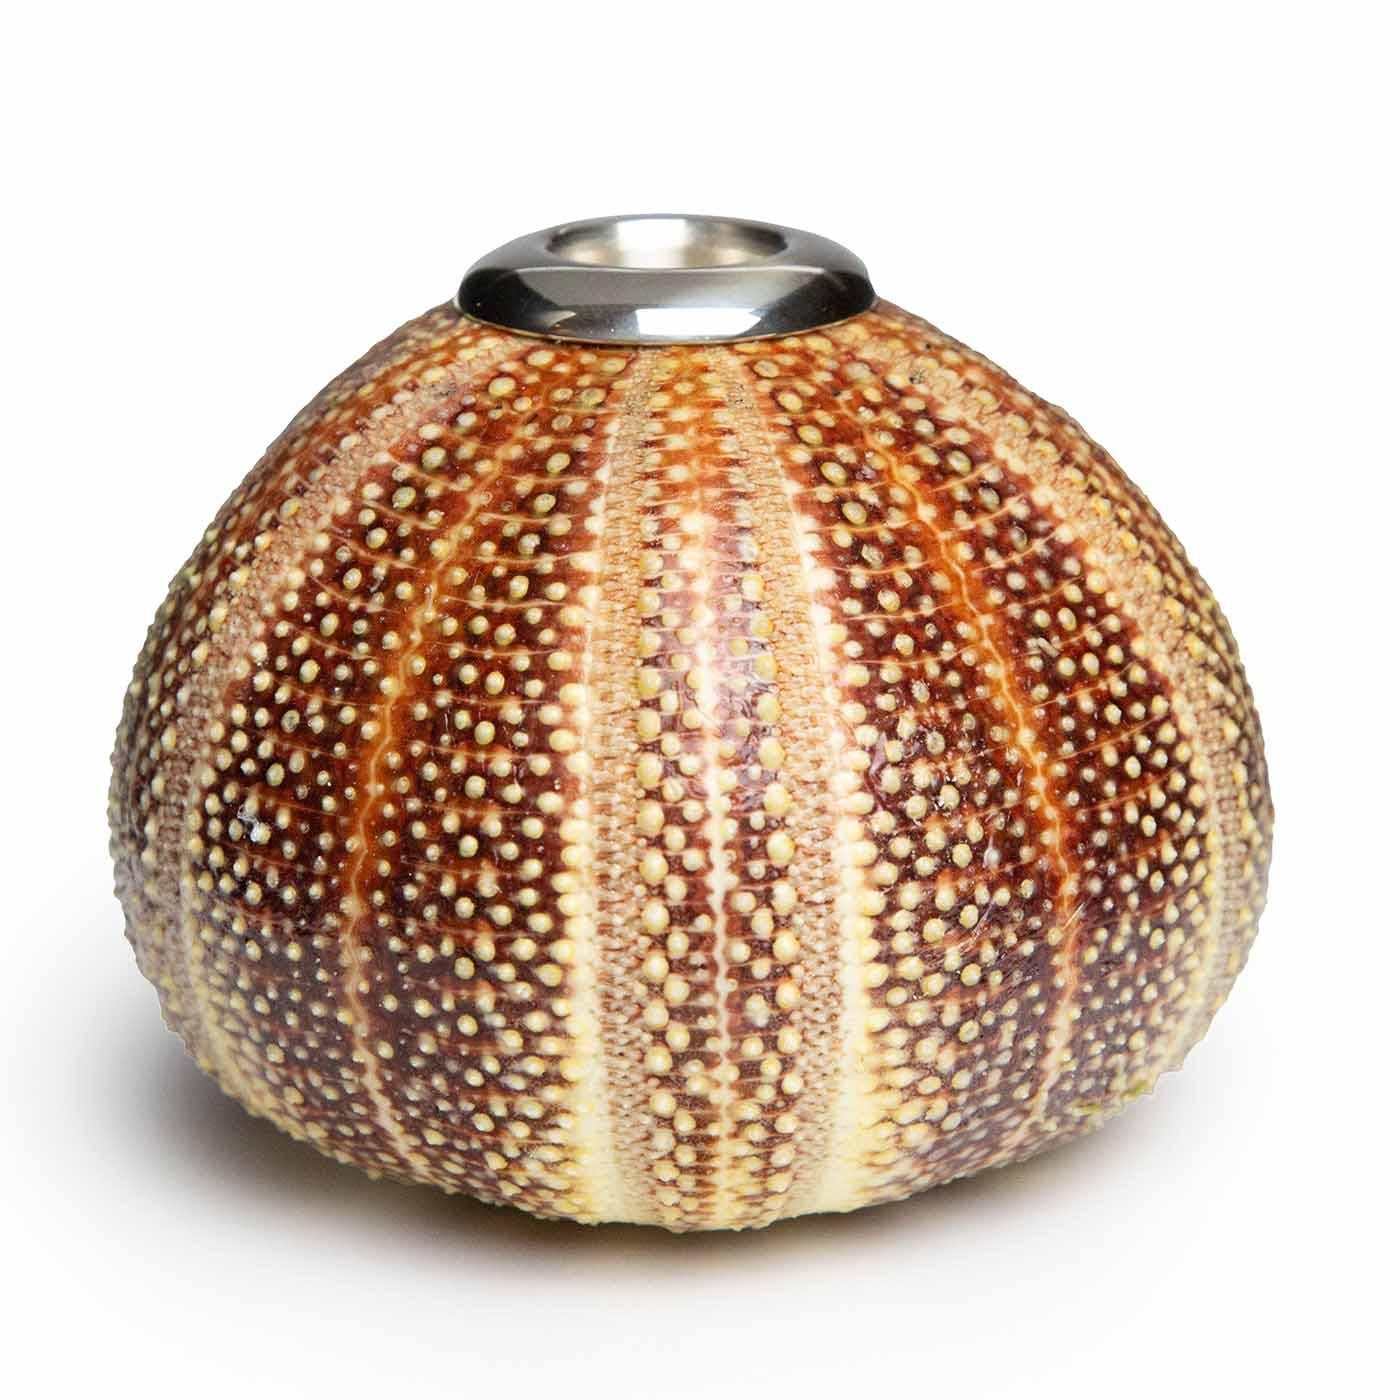 Large Urchin Candle Holder by Creel and Gow.

At Creel and Gow, we take great pride in our signature silvered shells, which have been a hallmark of our collection for over 20 years. To create these exquisite pieces, we have been working with the